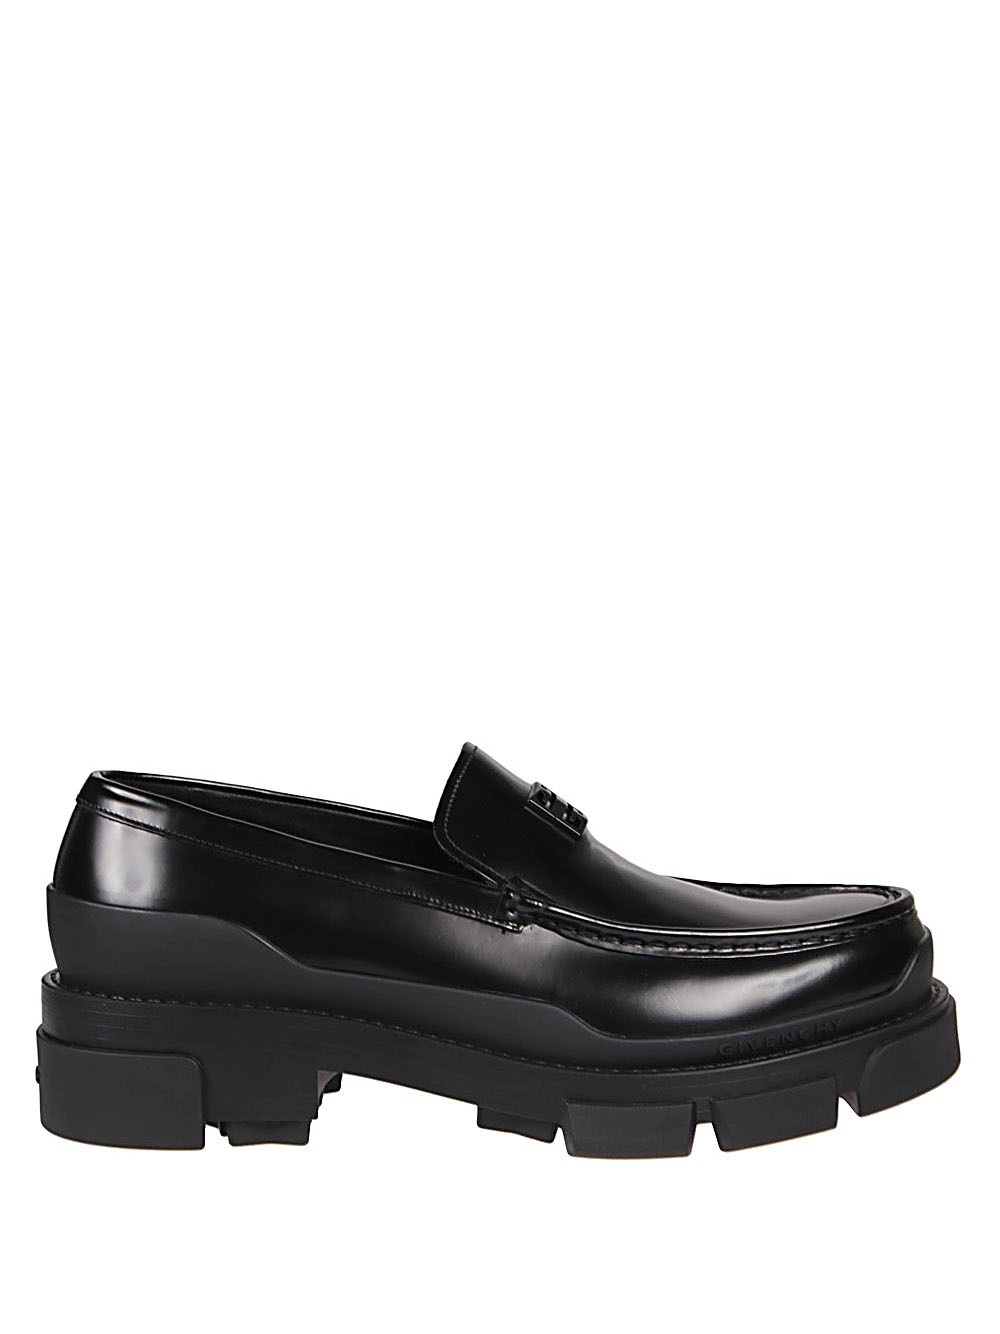 GIVENCHY - Leather Loafer Givenchy